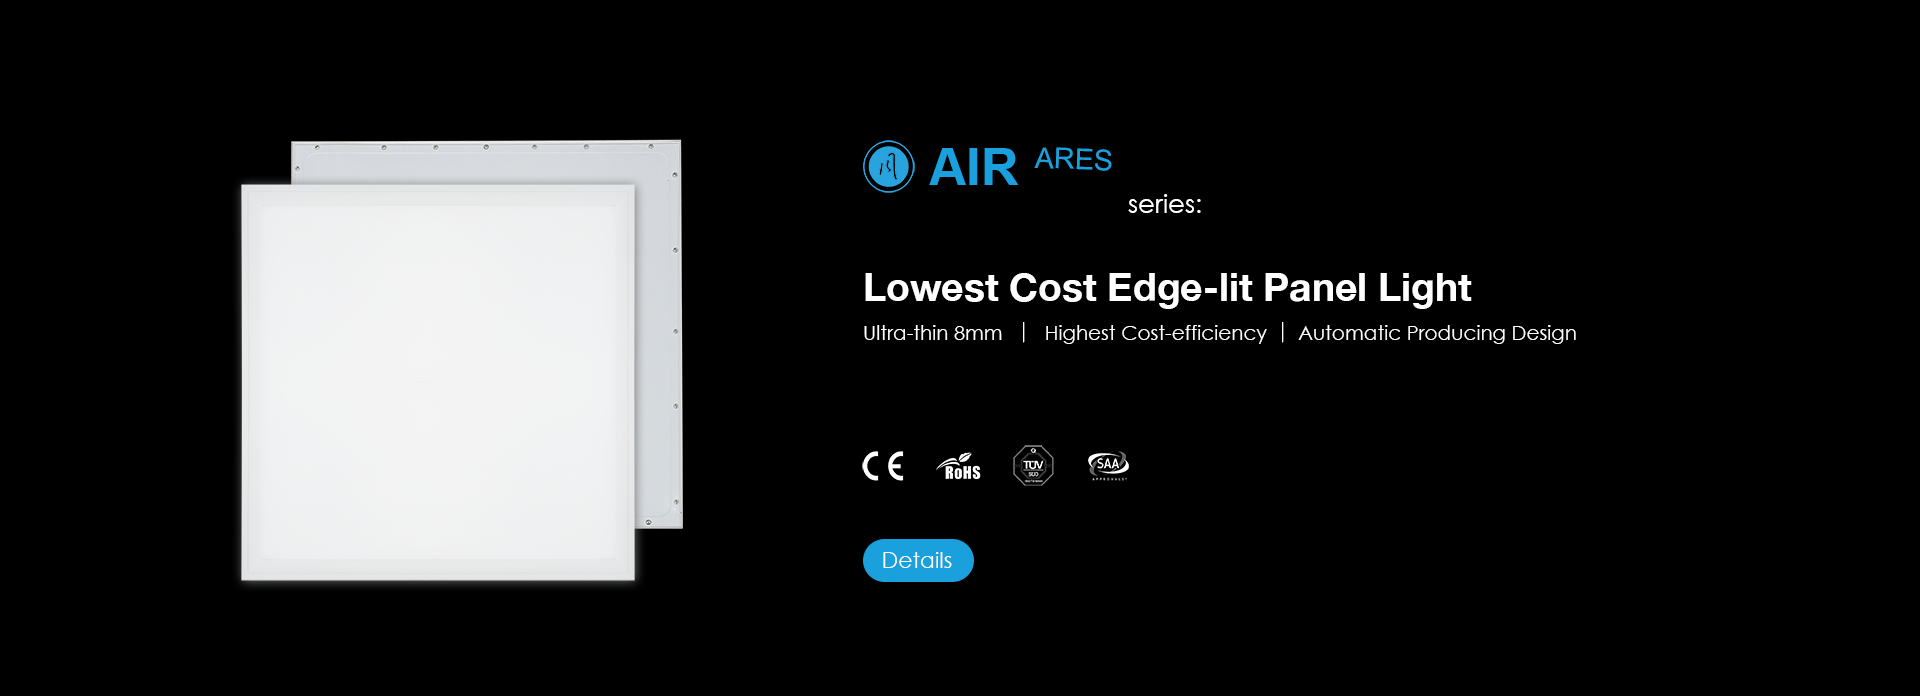 ARES Lowest Cost Edge-lit Panel Light